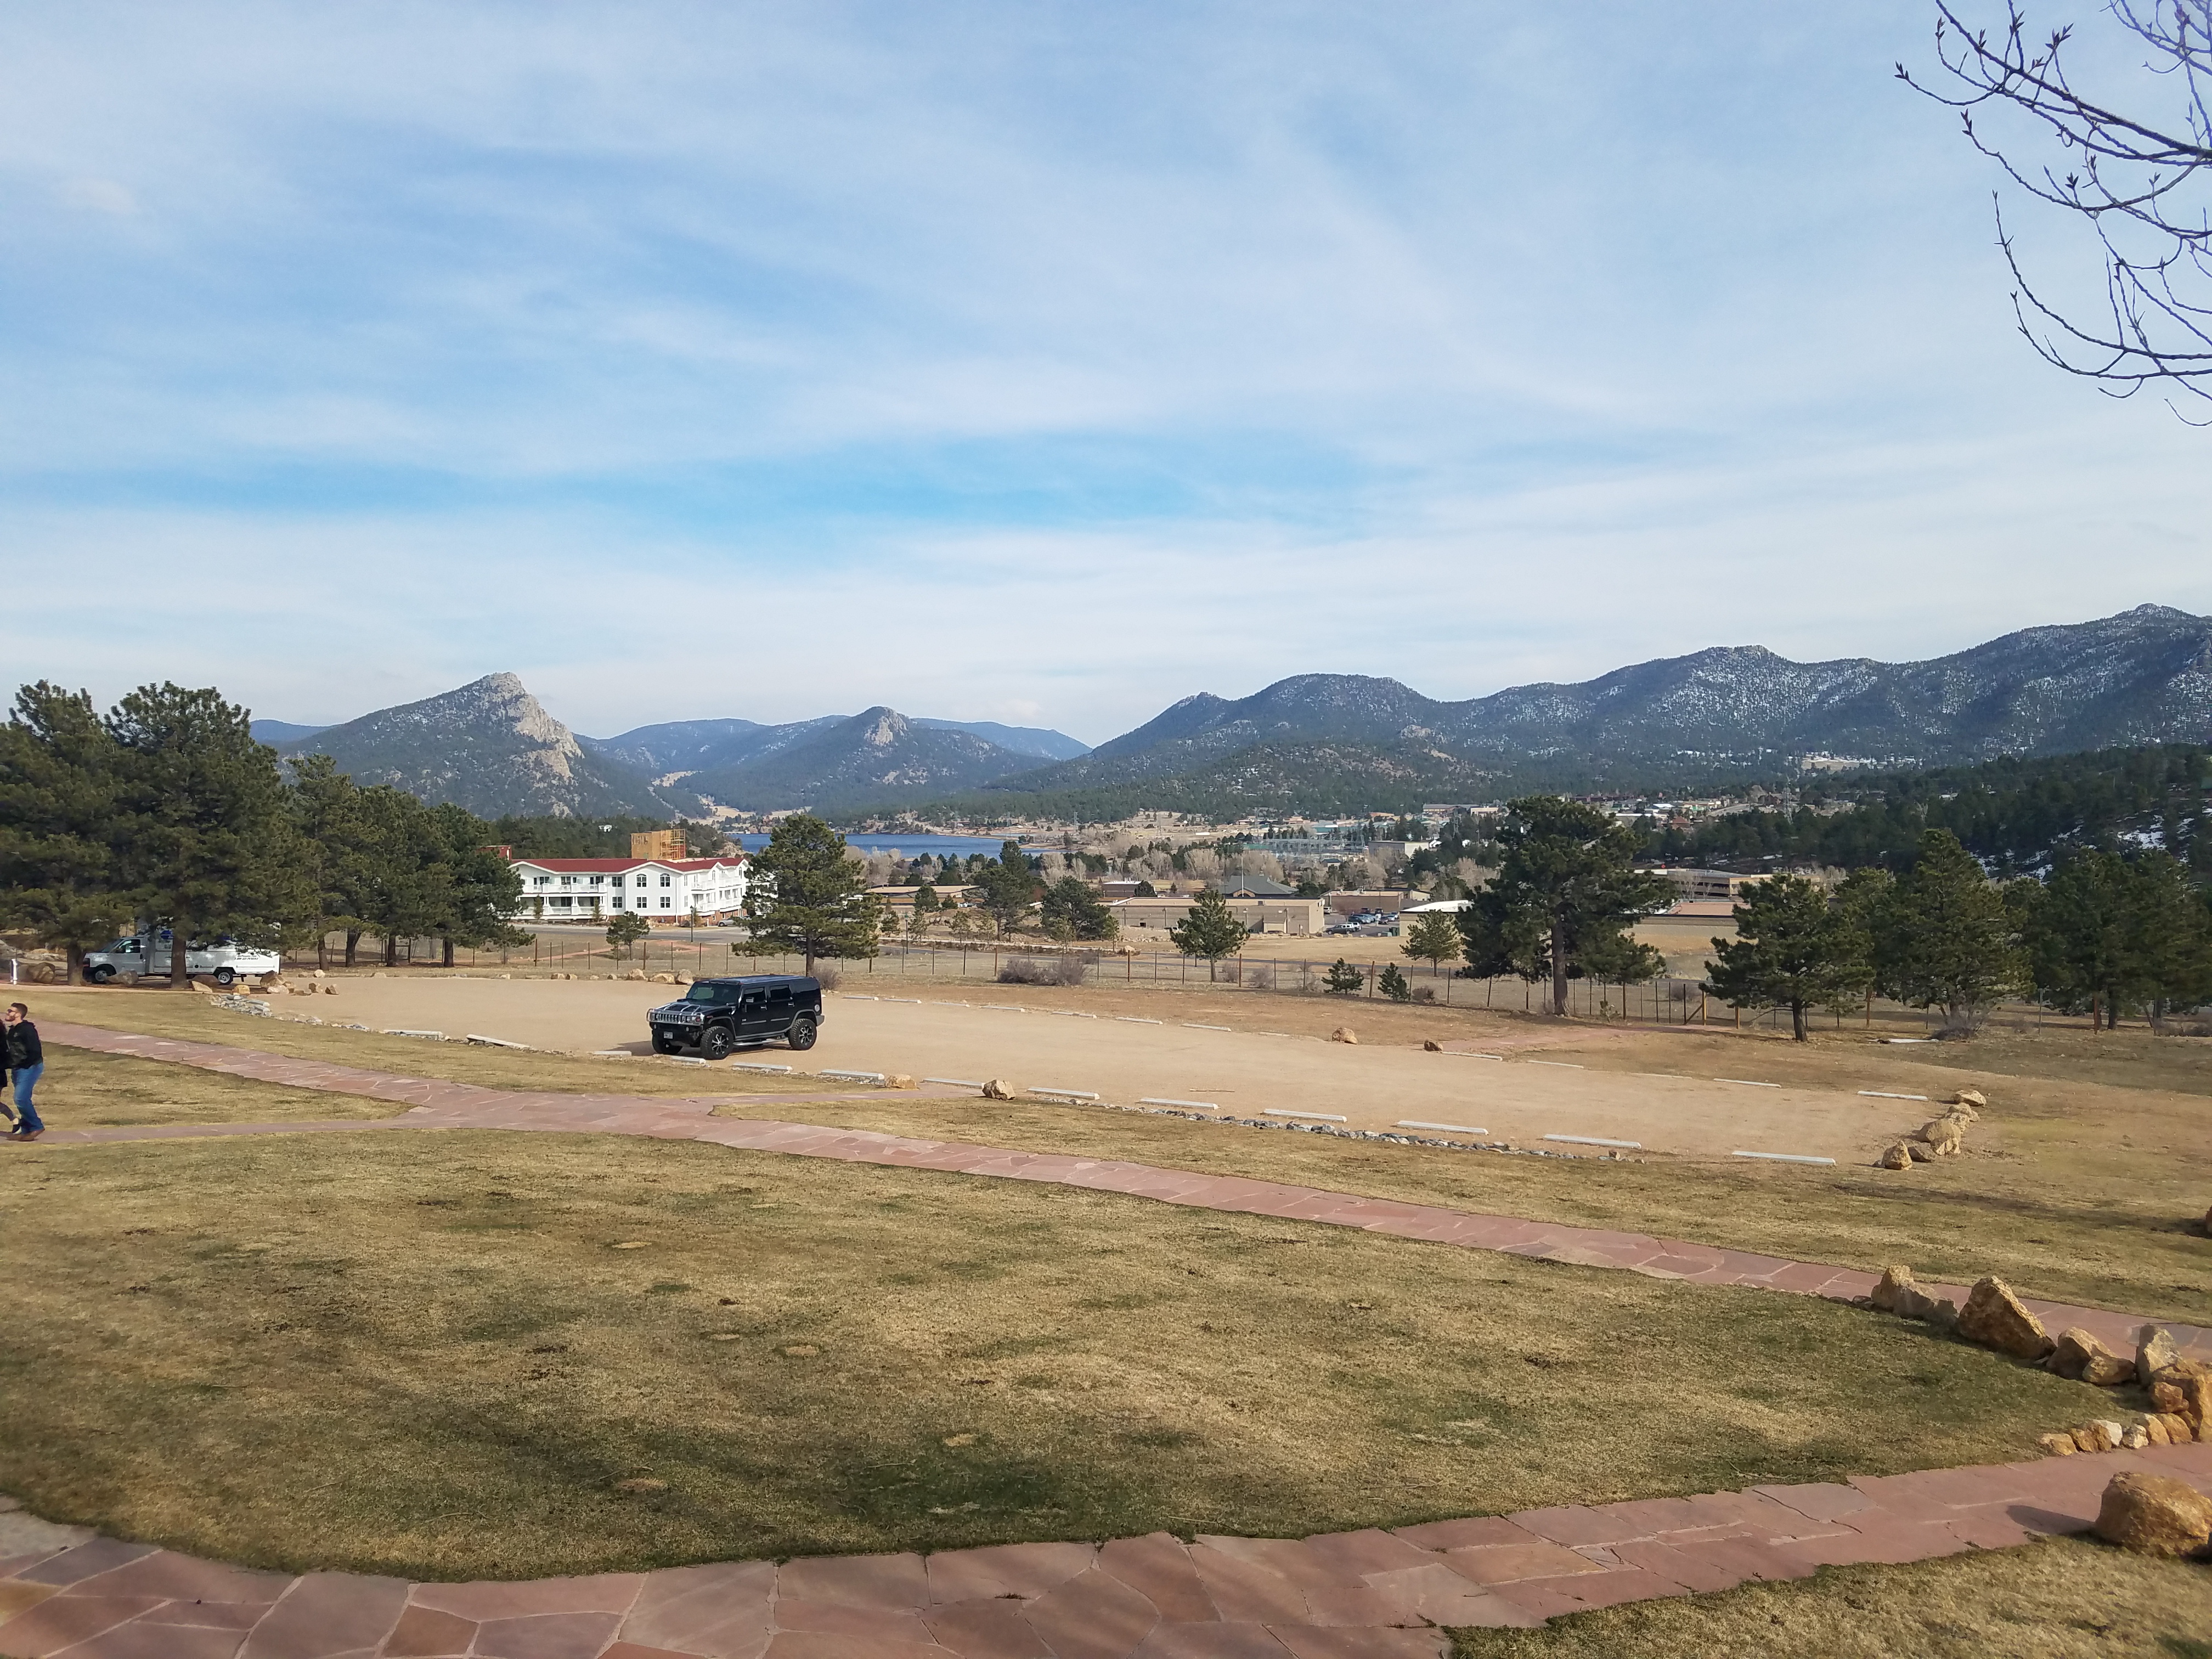 View of Estes Park from the Stanley Hotel